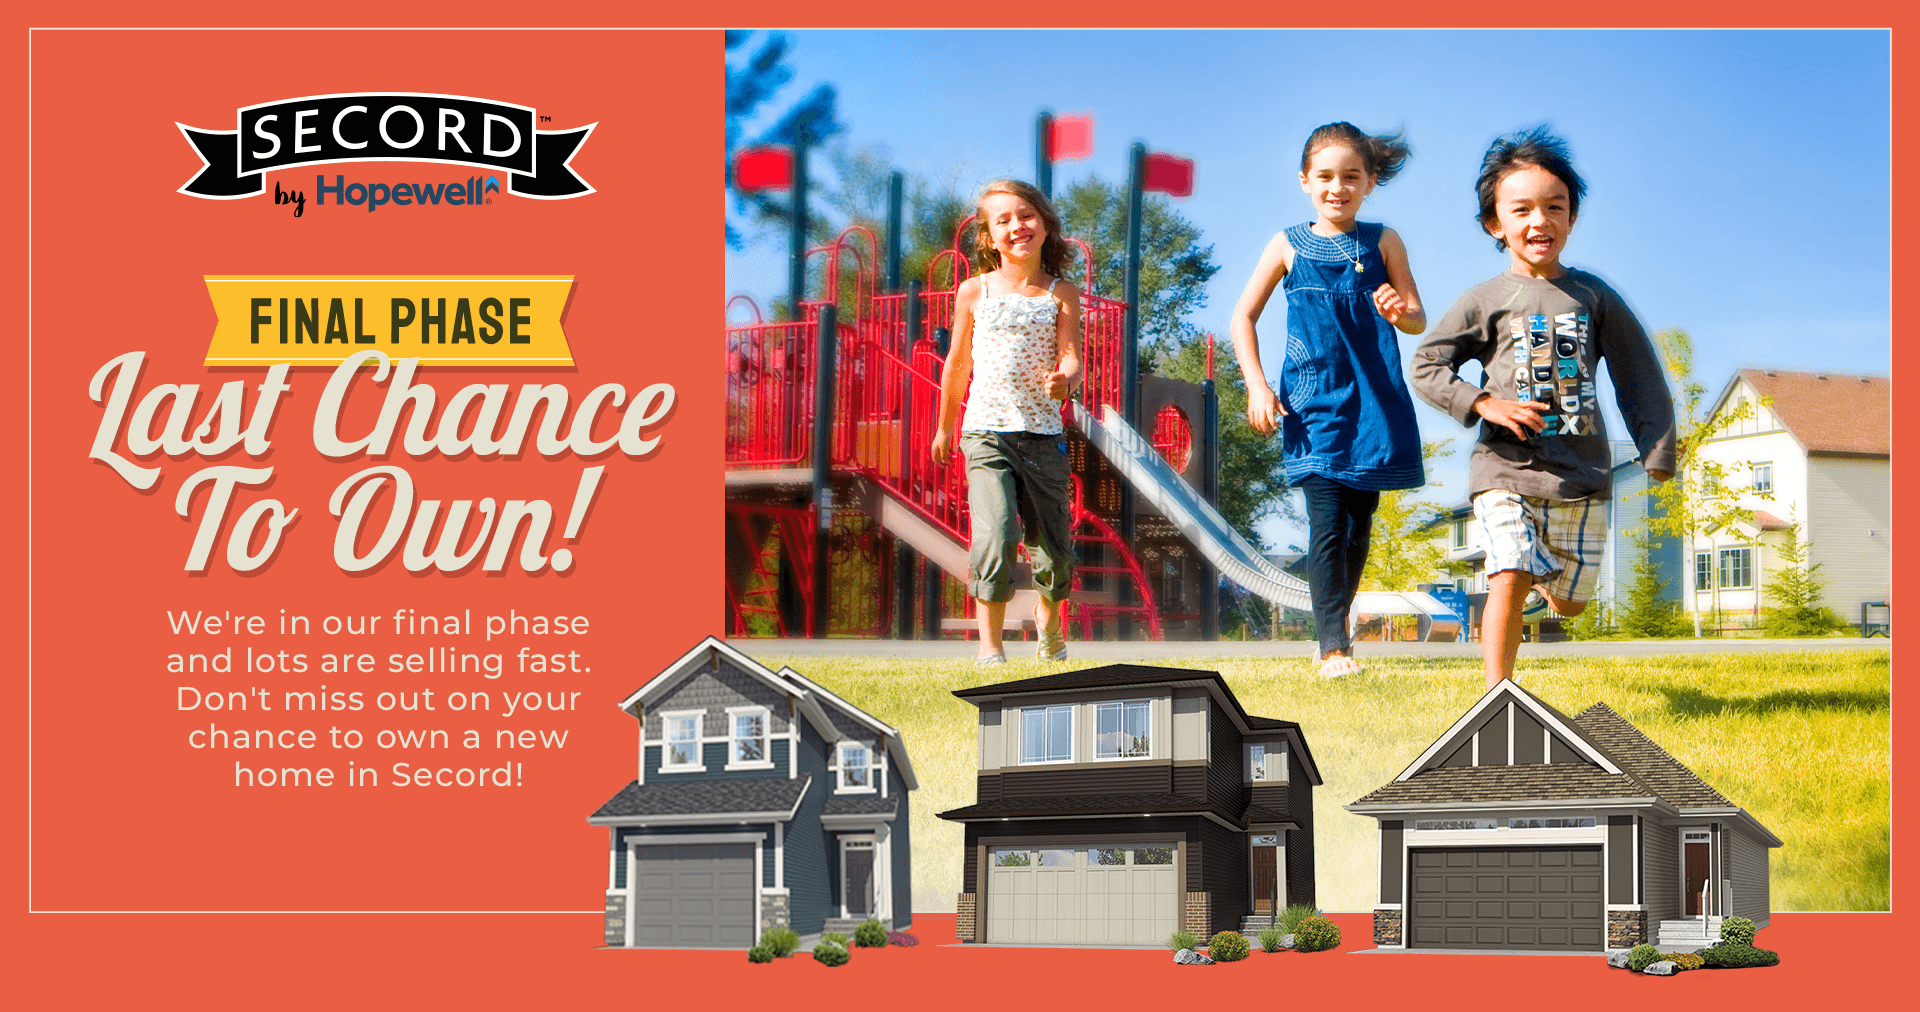 Text: Final Phase - Last Chance to Own. We're in our final phase and lots are selling fast. Don't miss out on your chance to own a home in Secord. Image: 3 kids coming from playground.